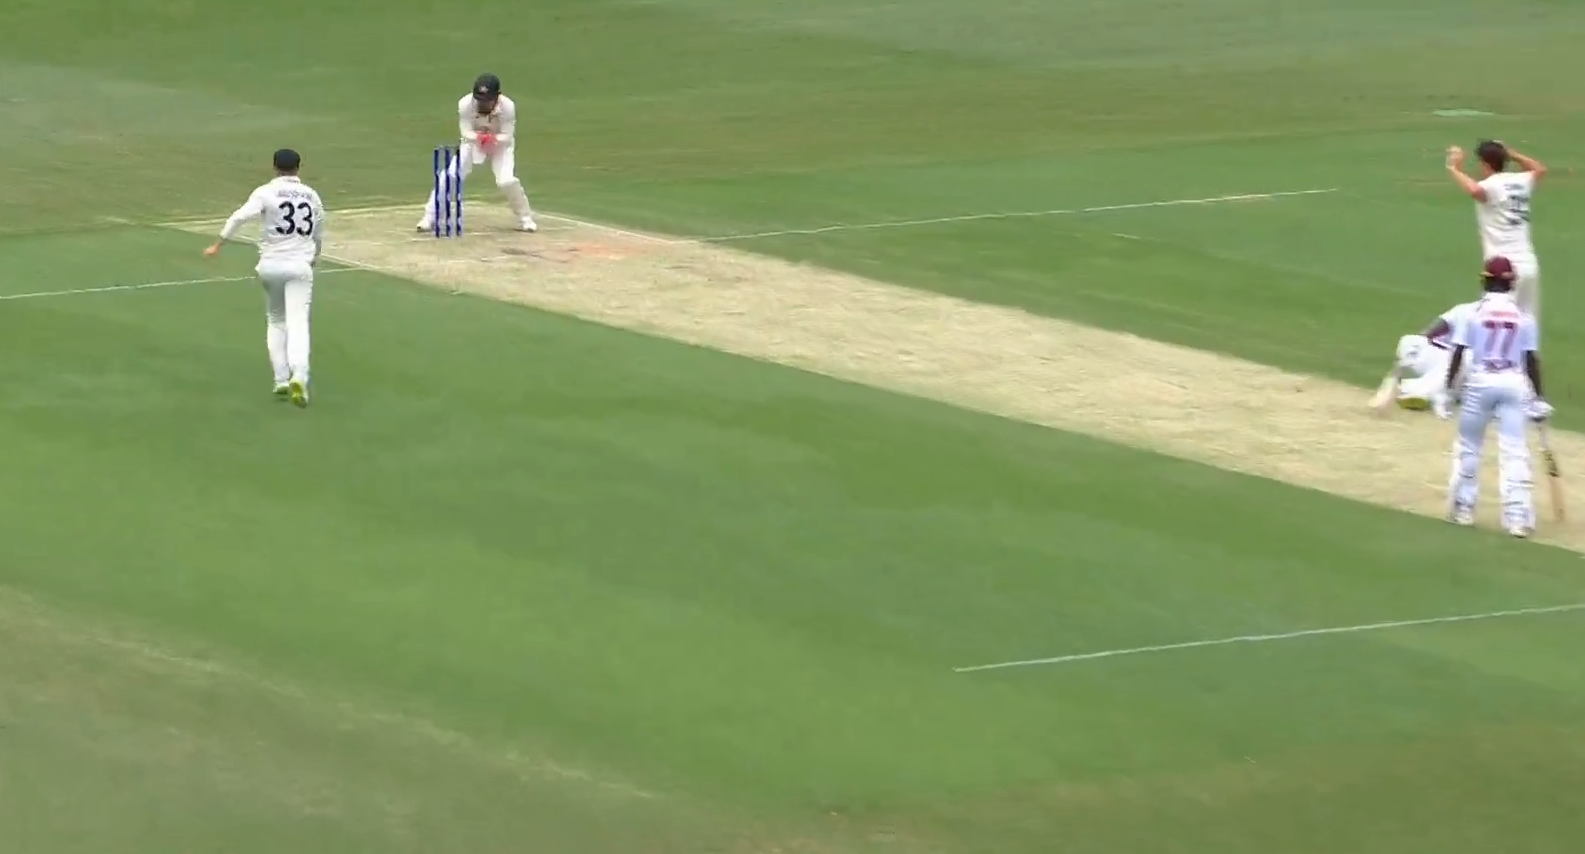 AUS vs WI: [WATCH] Kemar Roach Experiences A Run-Out After Slipping In A Disastrous Mix-Up During The Second Test